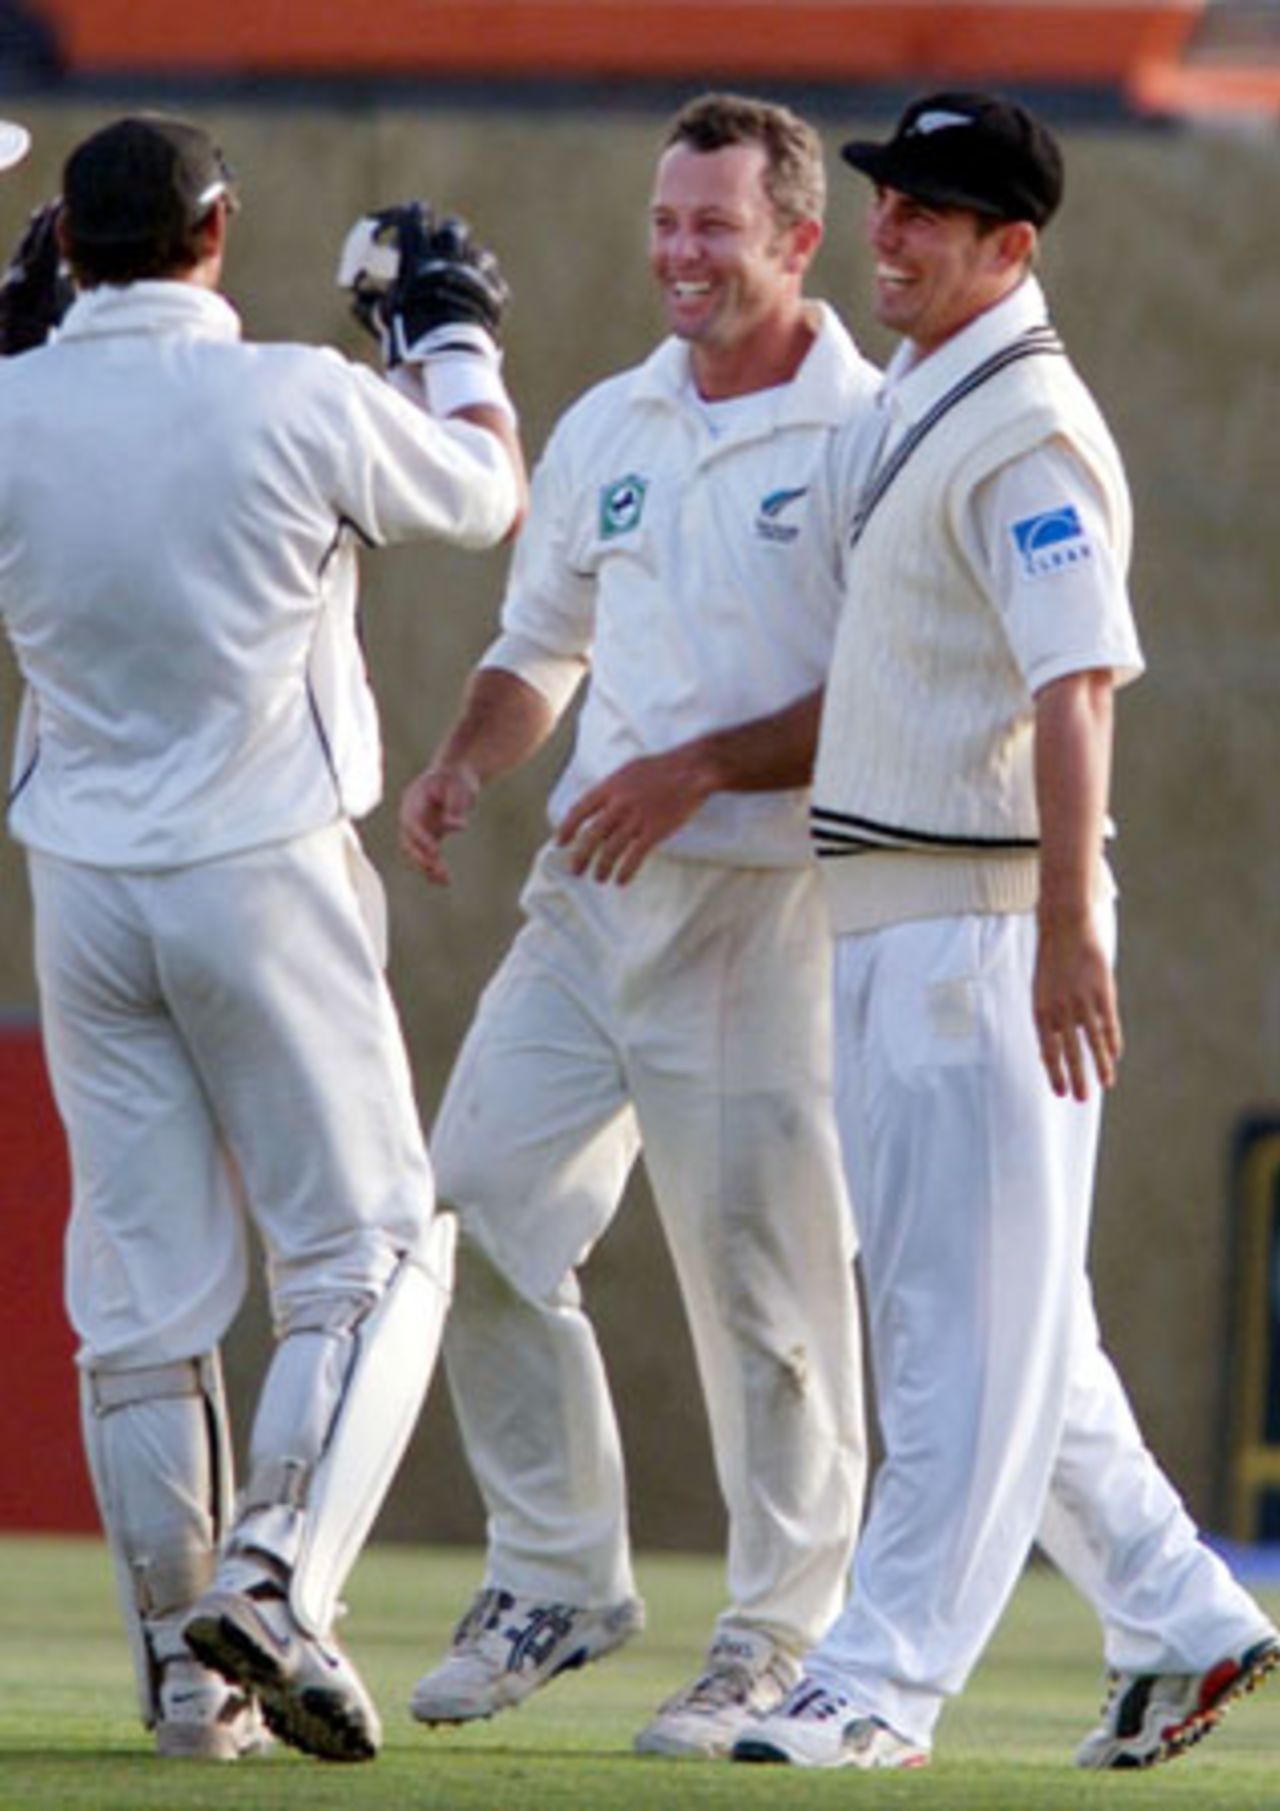 New Zealand slow left arm orthodox spinner Mark Richardson celebrates with team-mates Adam Parore (left) and Mathew Sinclair after taking the wicket of Pakistan batsman Yousuf Youhana, caught and bowled for 203. Yousuf is Richardson's first Test wicket. 2nd Test: New Zealand v Pakistan at Jade Stadium, Christchurch, 15-19 March 2001 (18 March 2001).